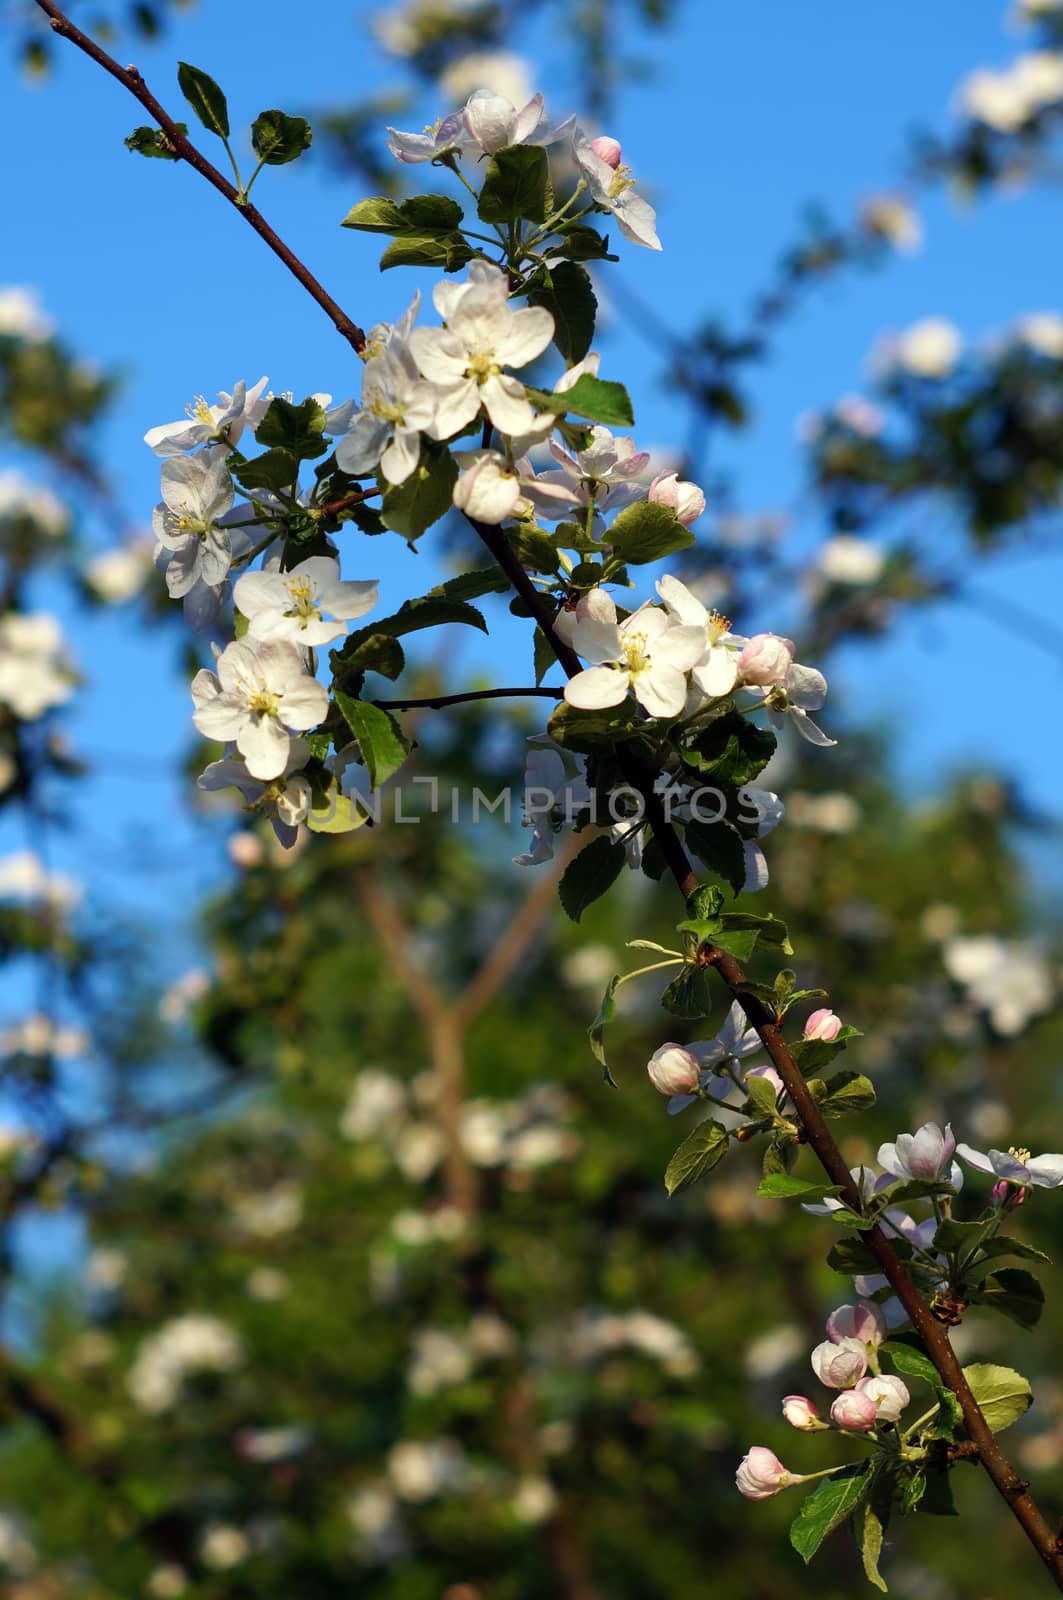 Branch blossoming apple-tree against the blue sky by Chiffanna